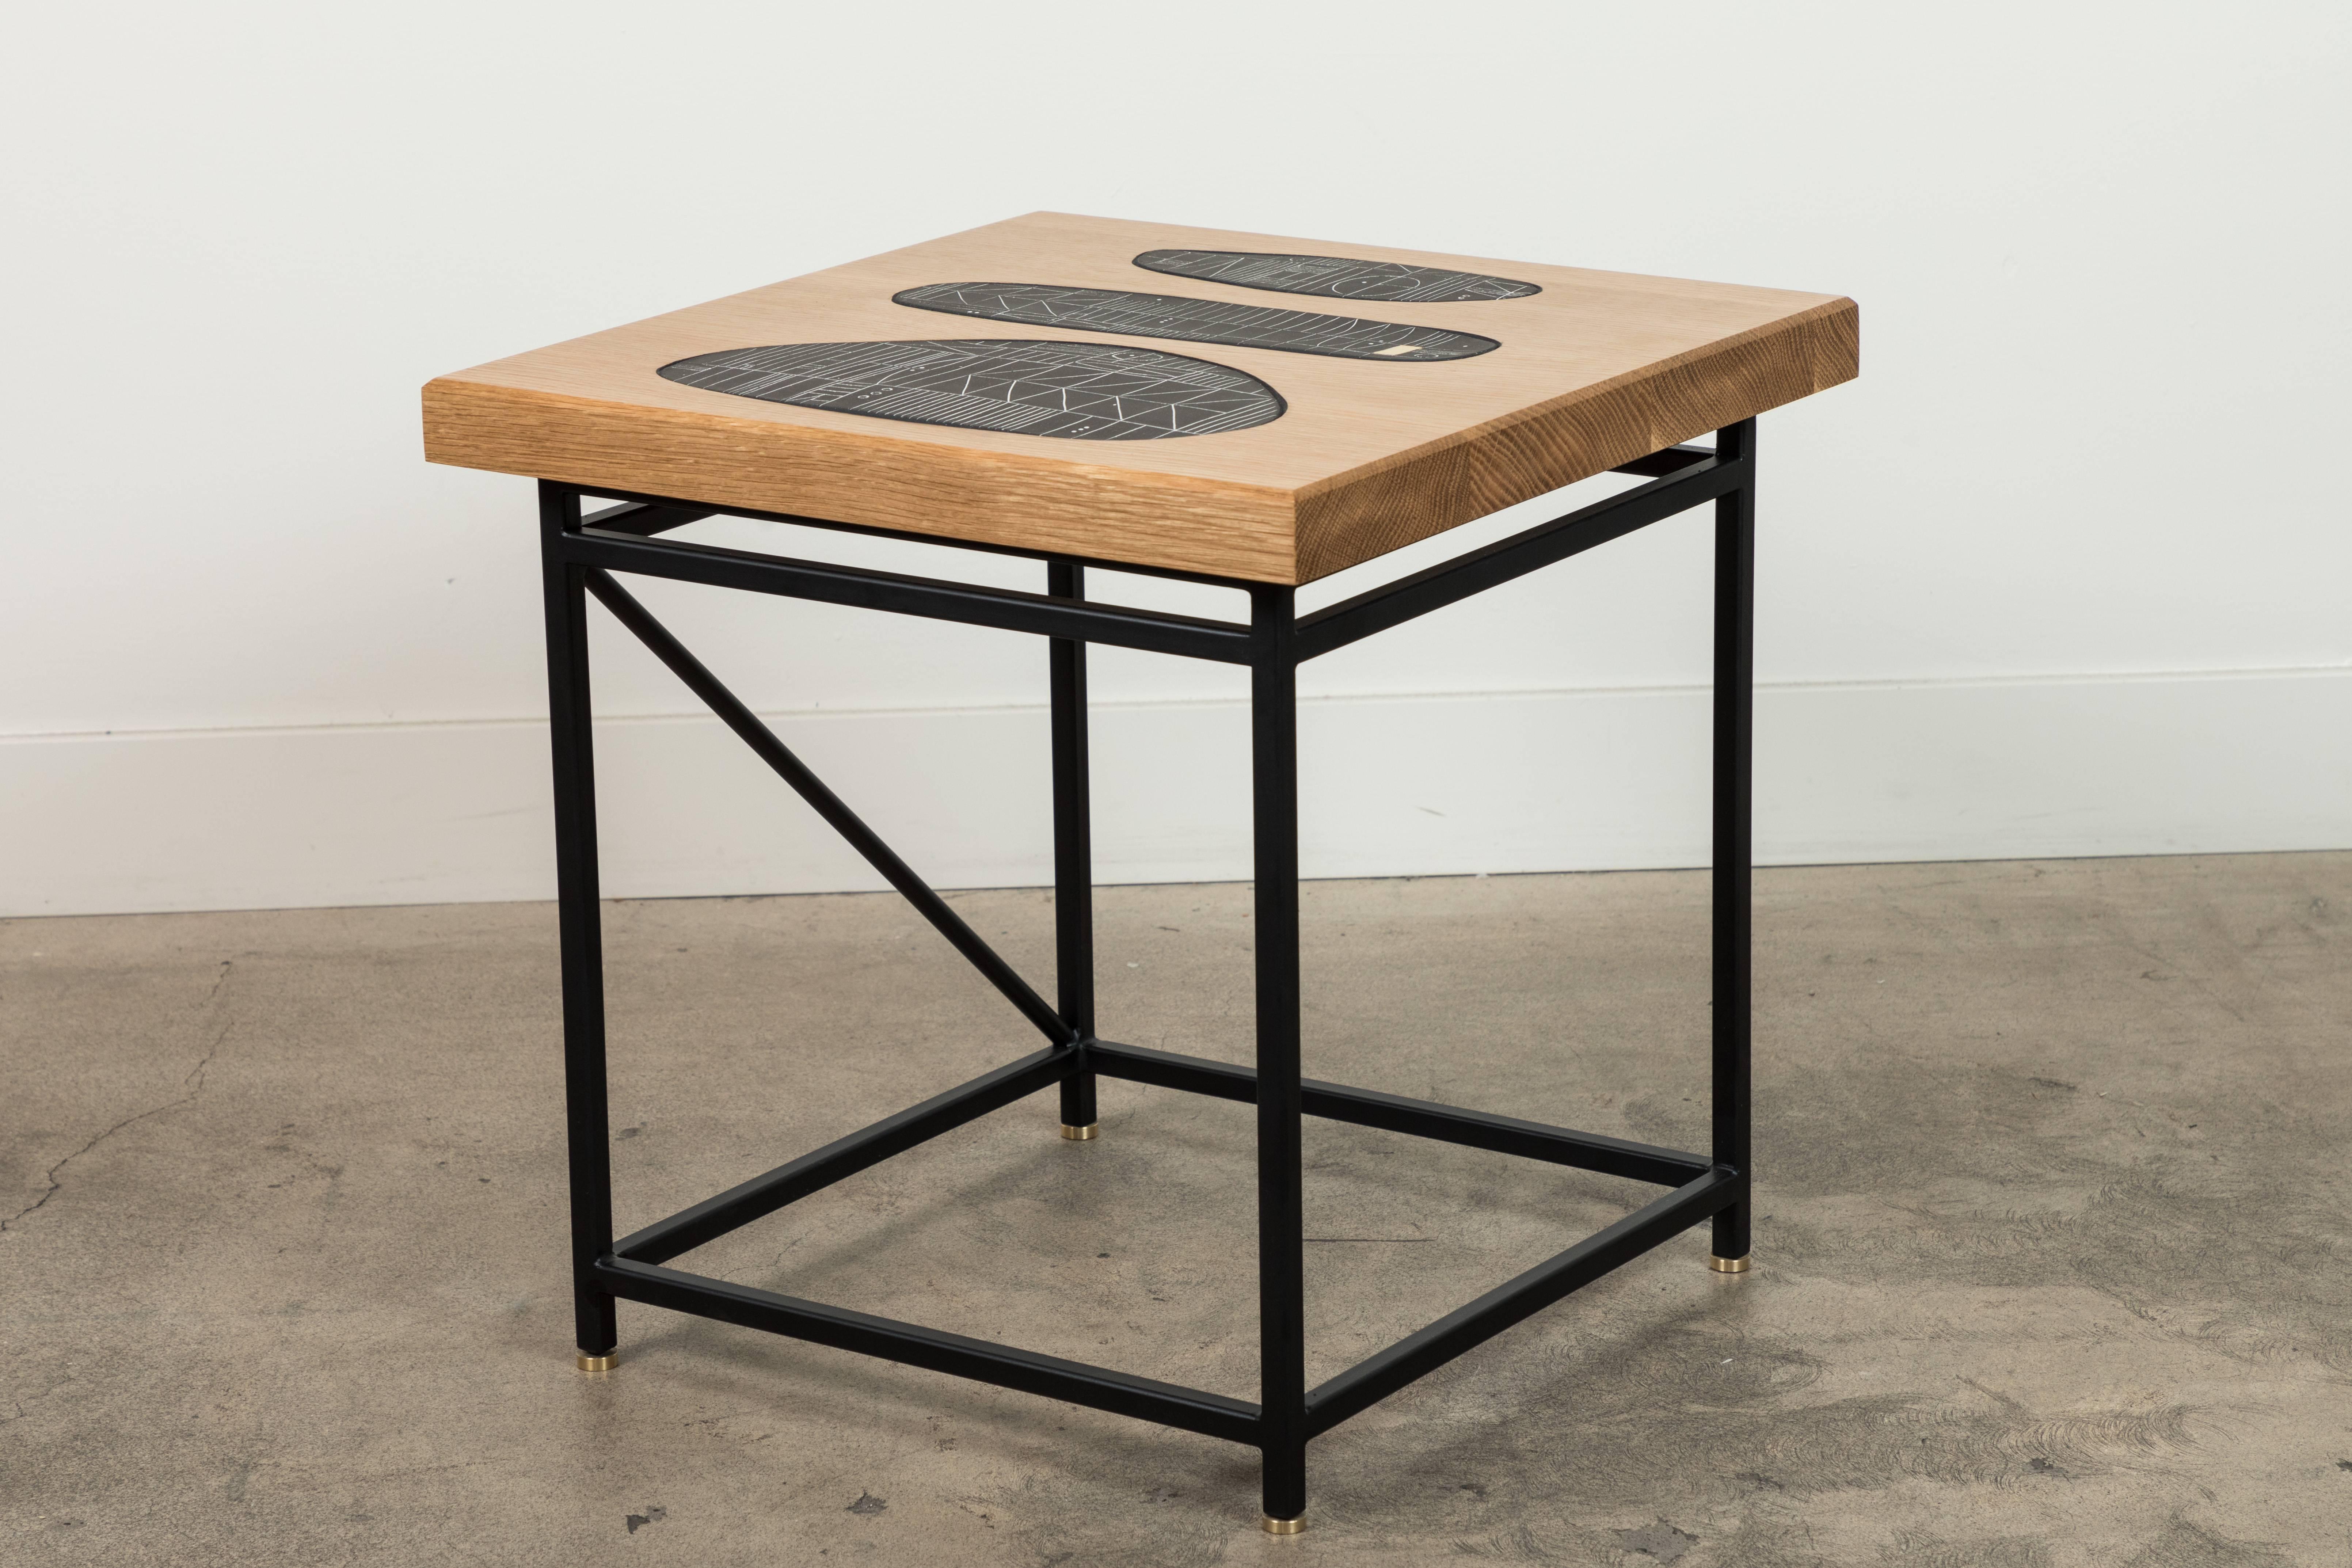 Solid Walnut and Ceramic Side Table by Heather Rosenman for Collabs in Clay 1